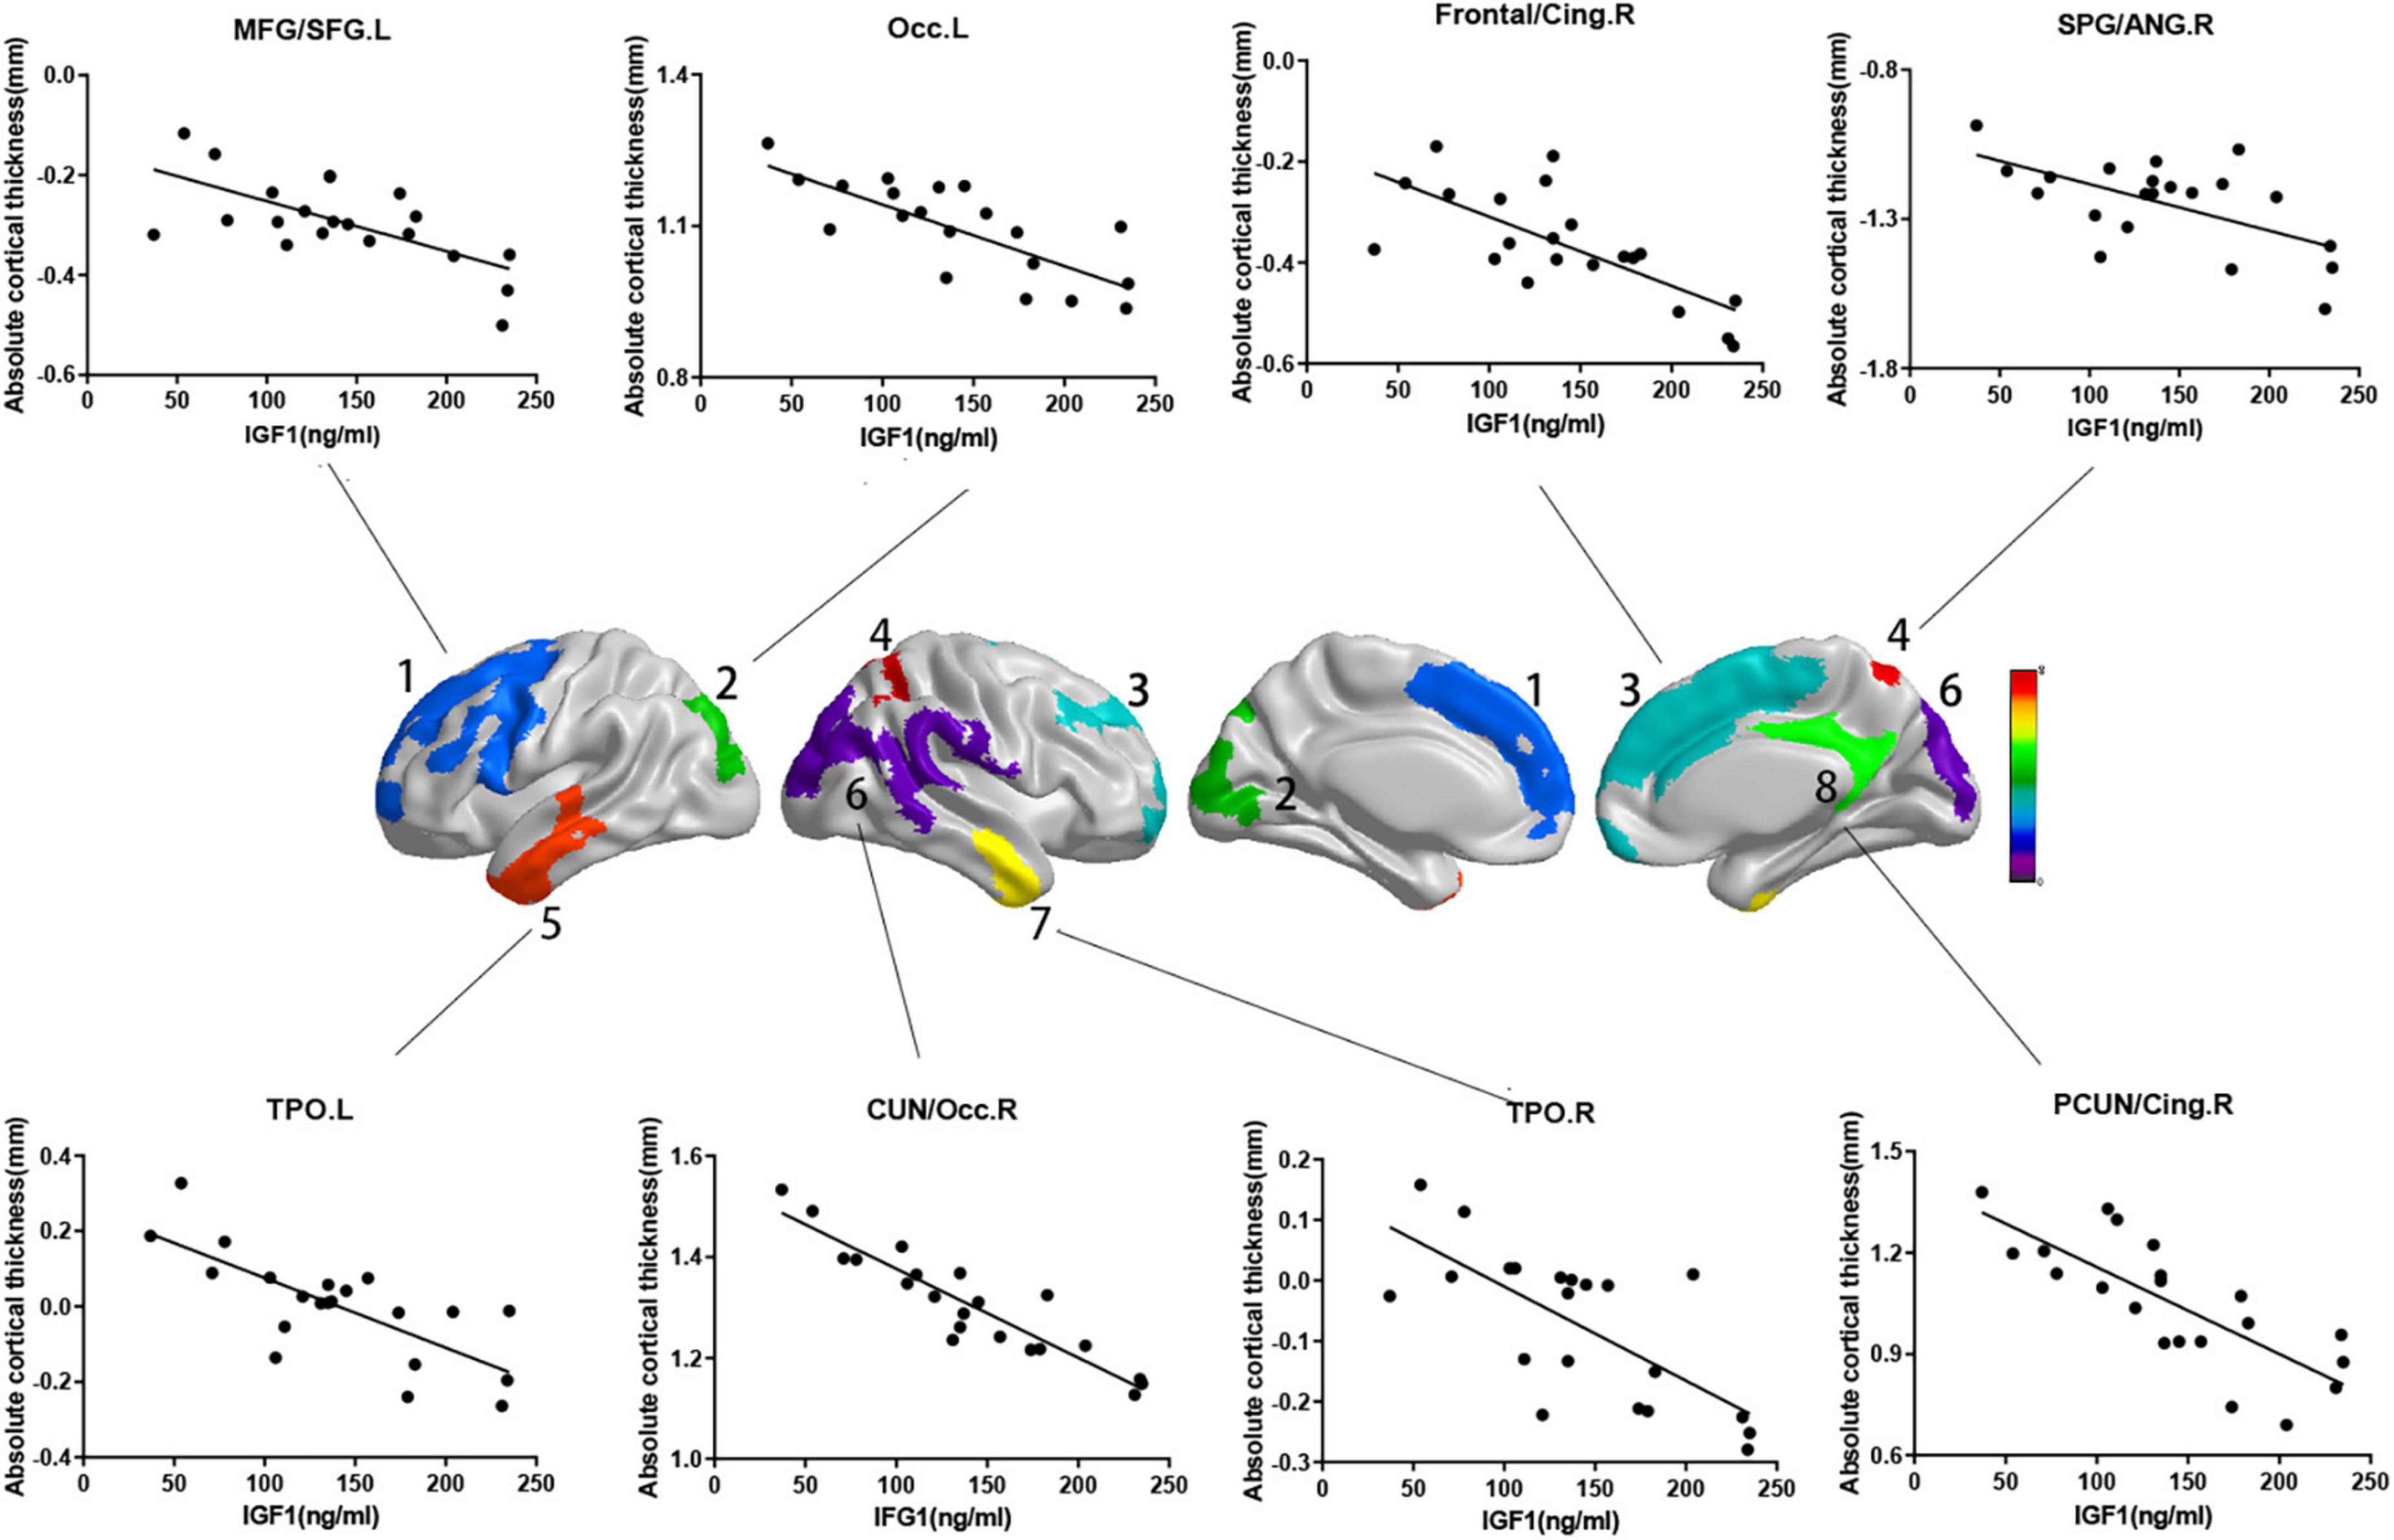 Alterations in brain structure and function associated with pediatric growth hormone deficiency: A multi-modal magnetic resonance imaging study